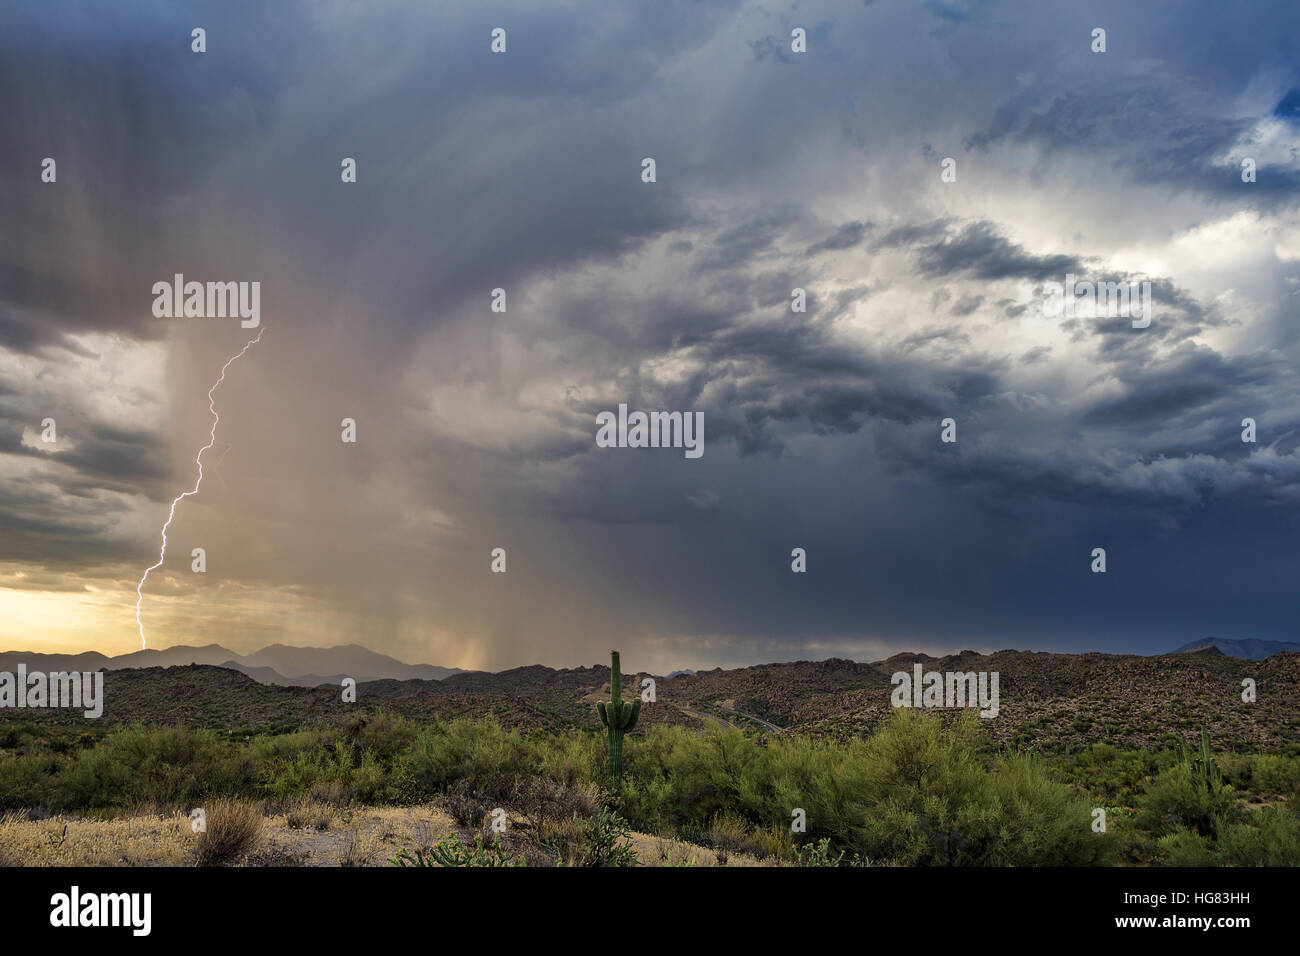 Summer monsoon storm with lightning strike and rain over the mountains in the Arizona desert Stock Photo